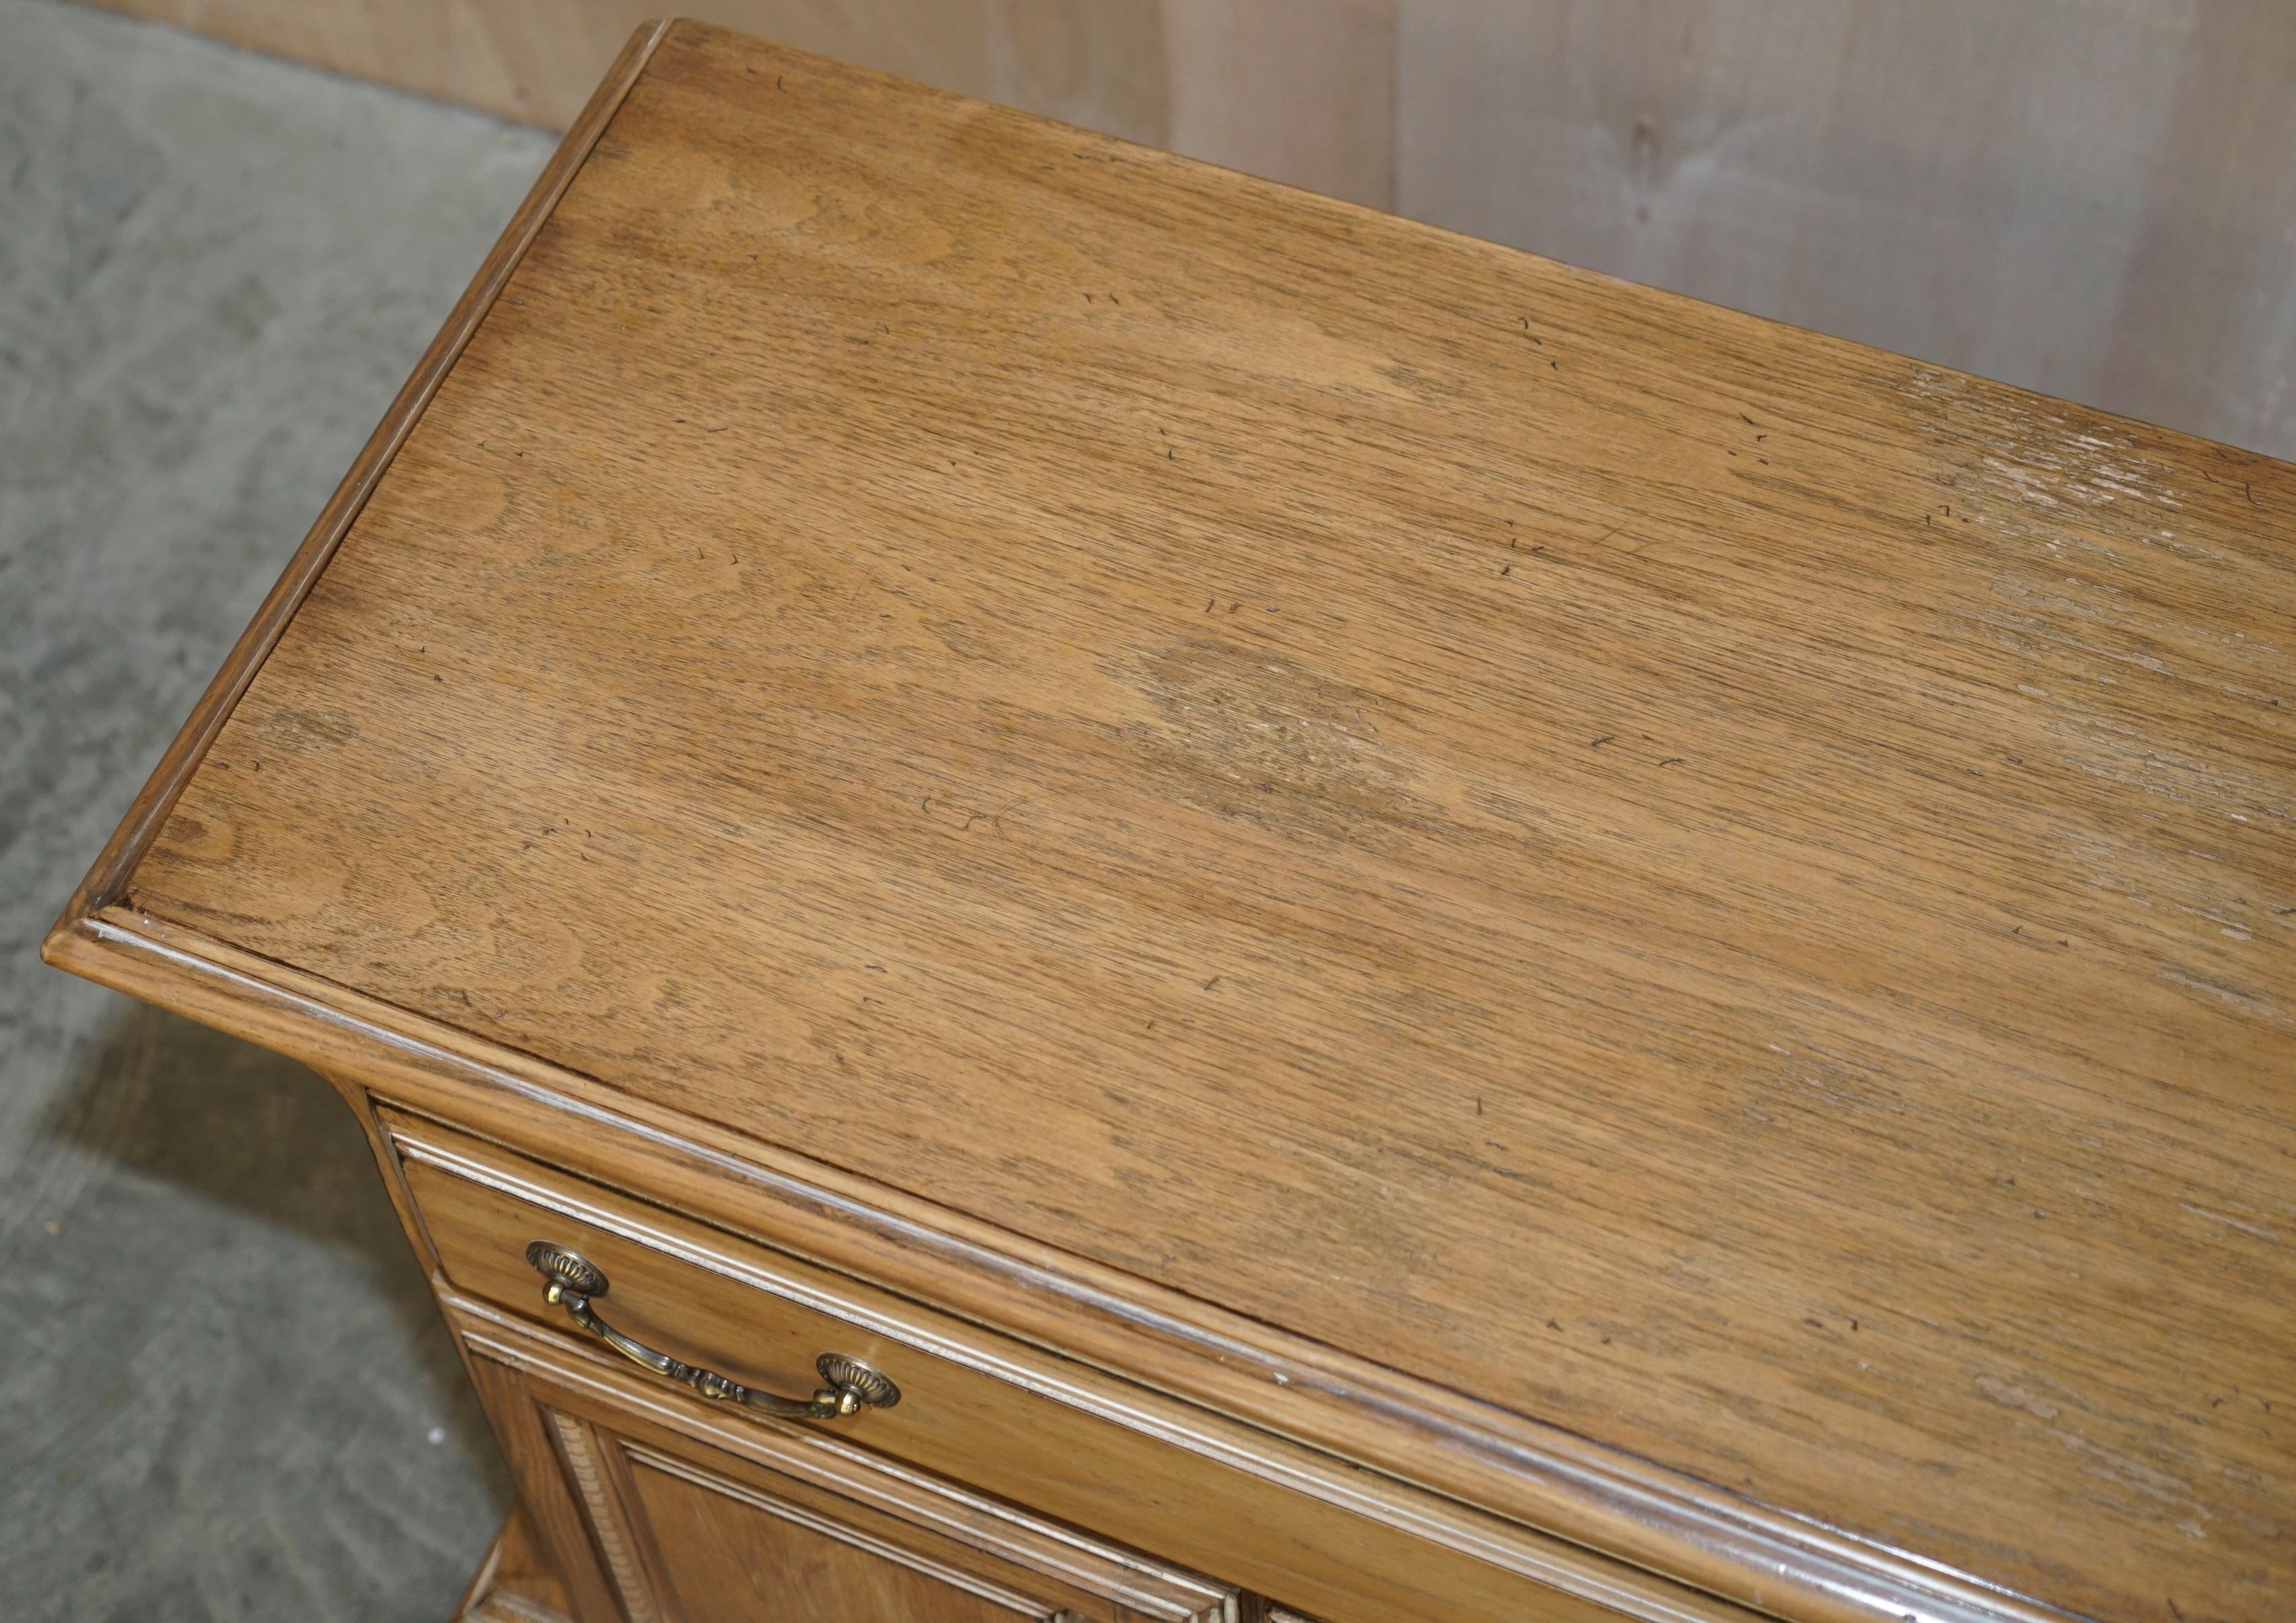 English Pair of Very Large Limed Oak Bedside Nightstands or Sideboards Lovely Timber